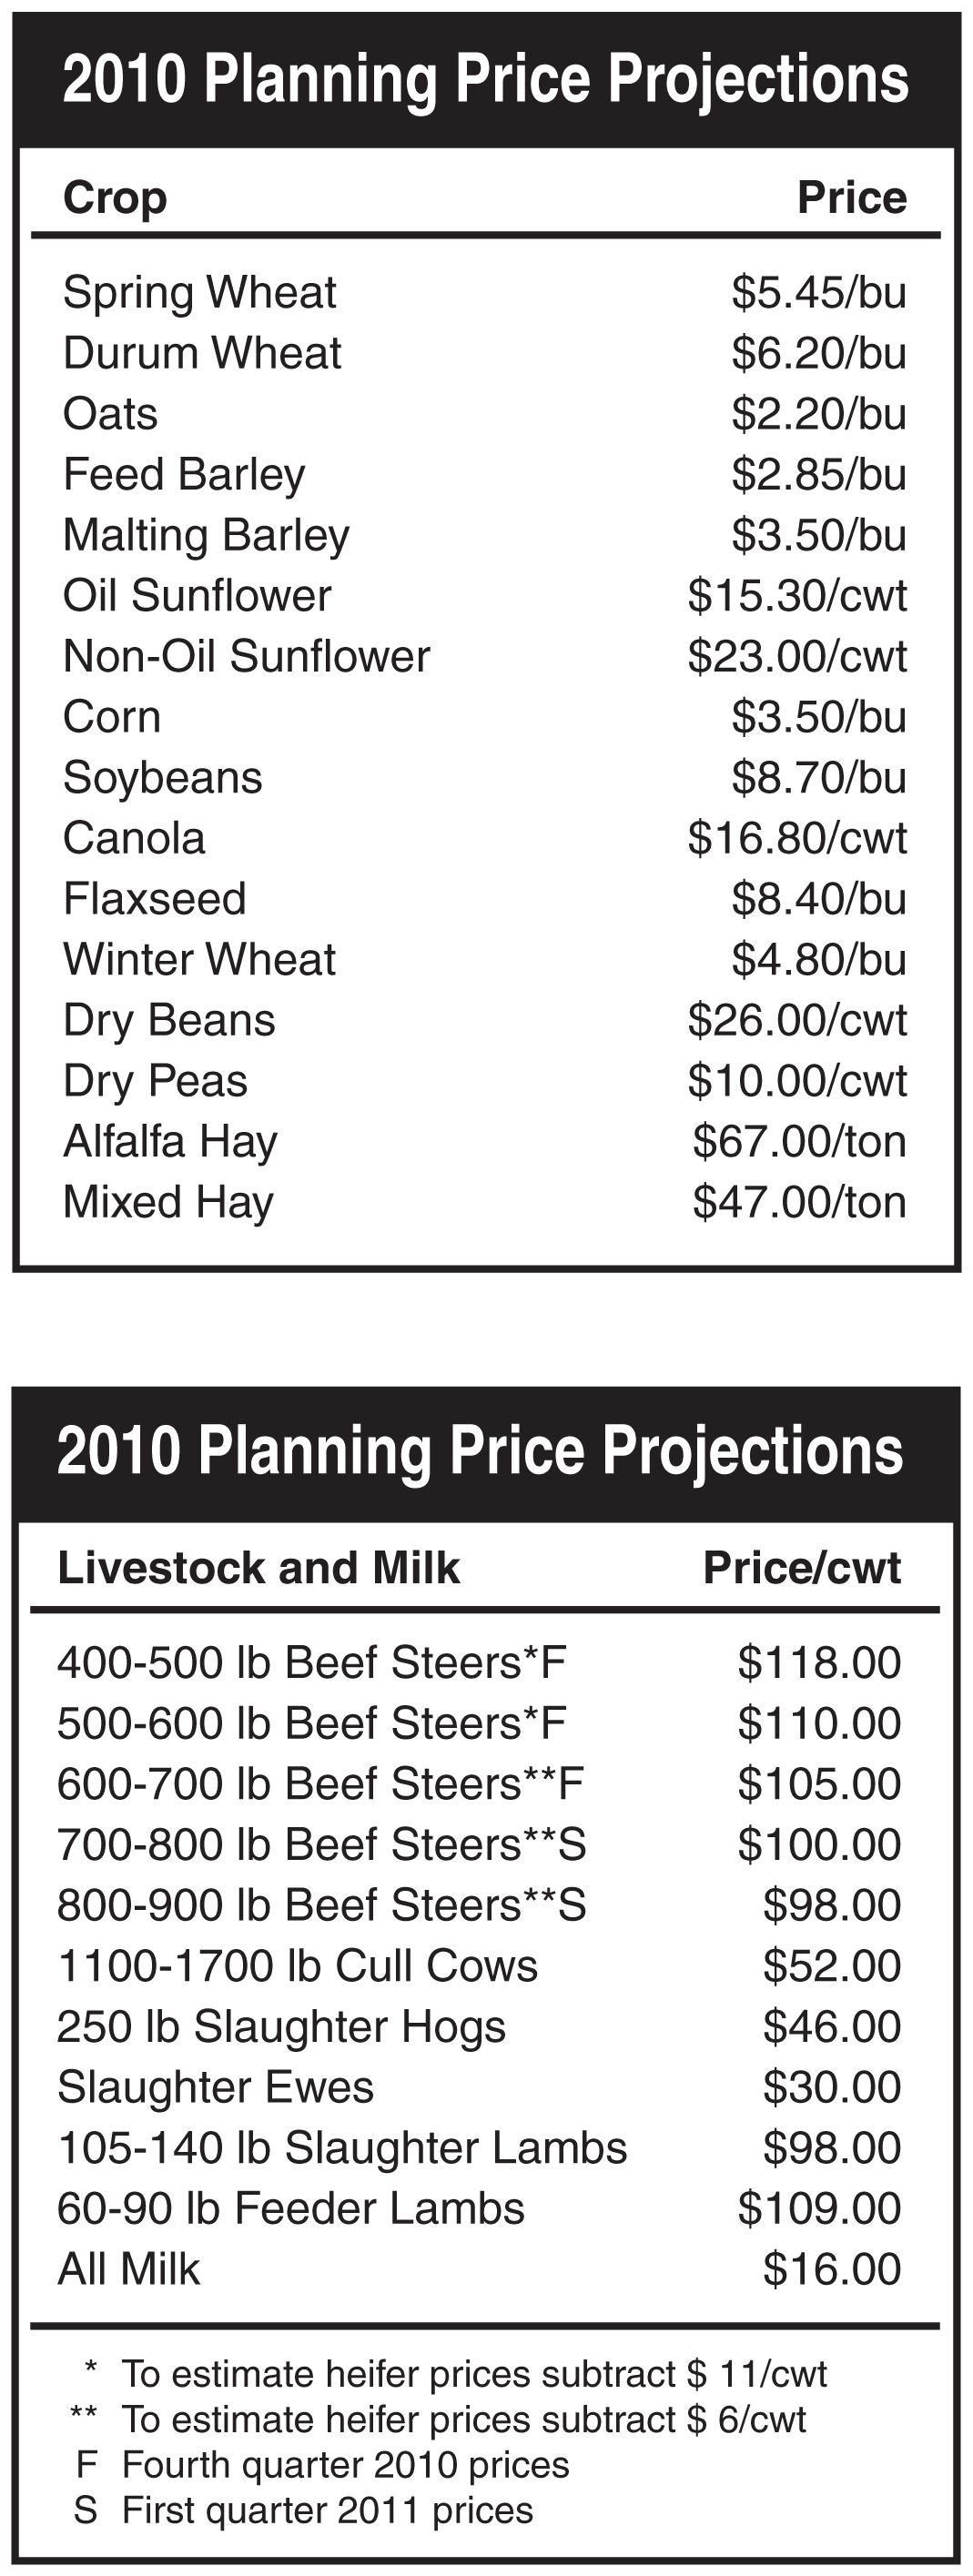 2010 Planning Price Projections